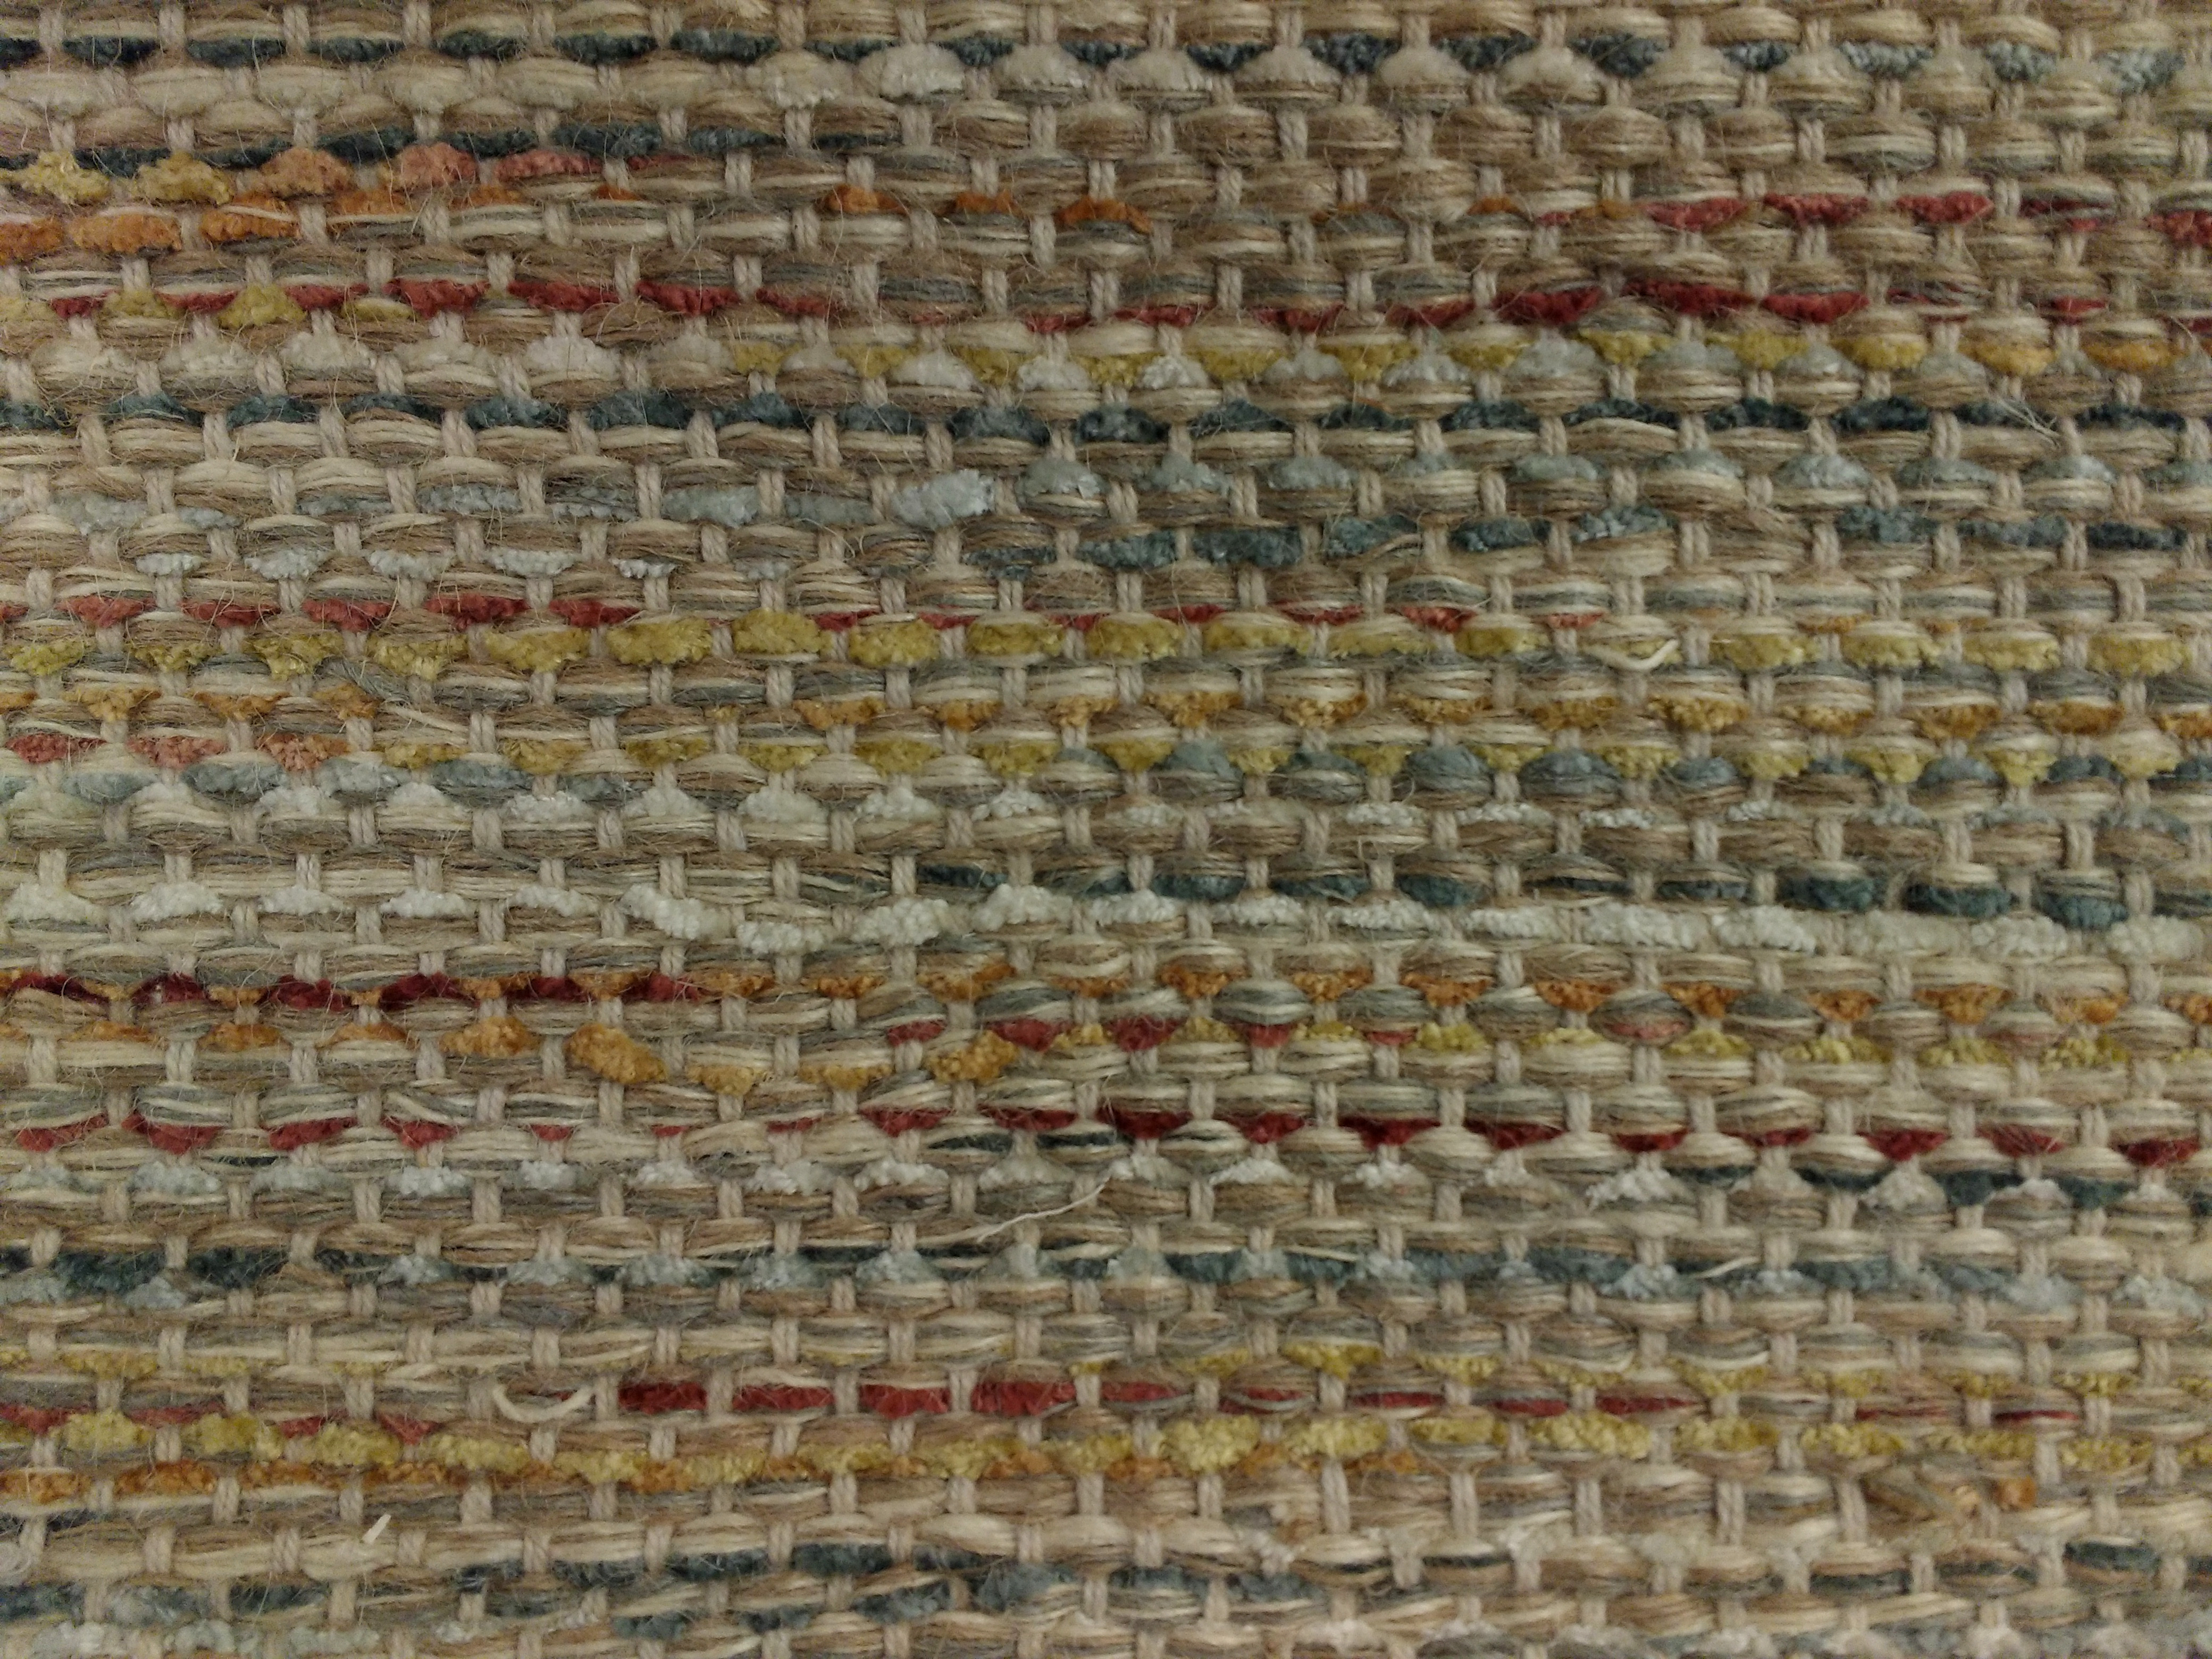 Woven Rug Texture Picture | Free Photograph | Photos ...
